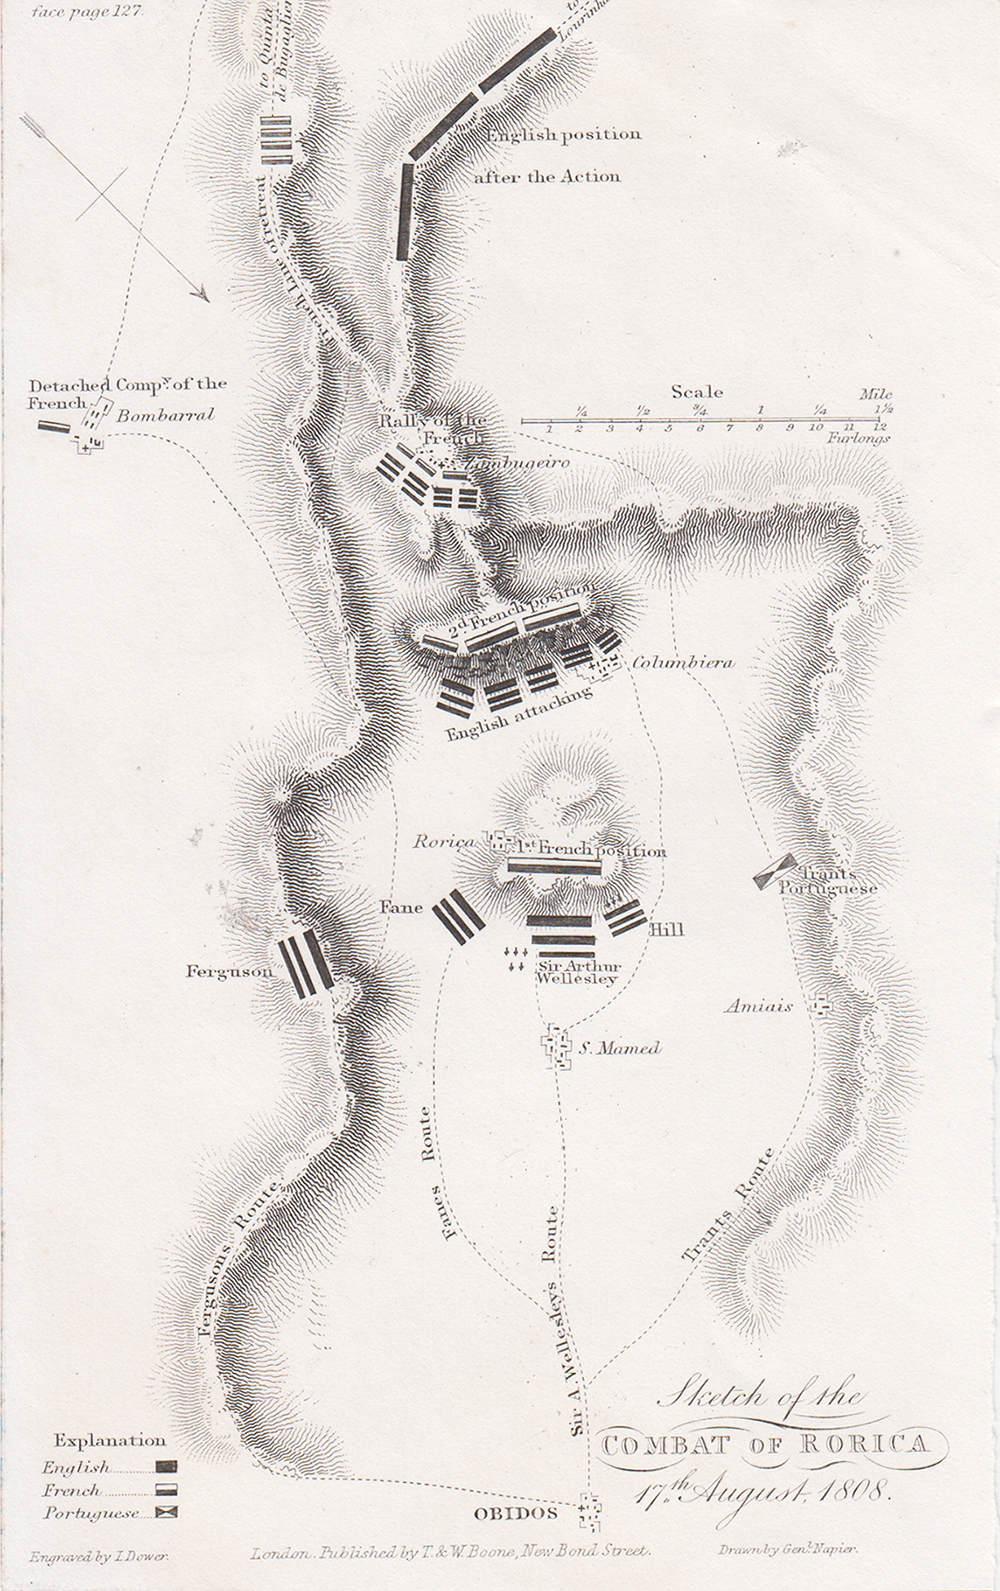 Sketch of the Combat of Rorica 17th August 1808